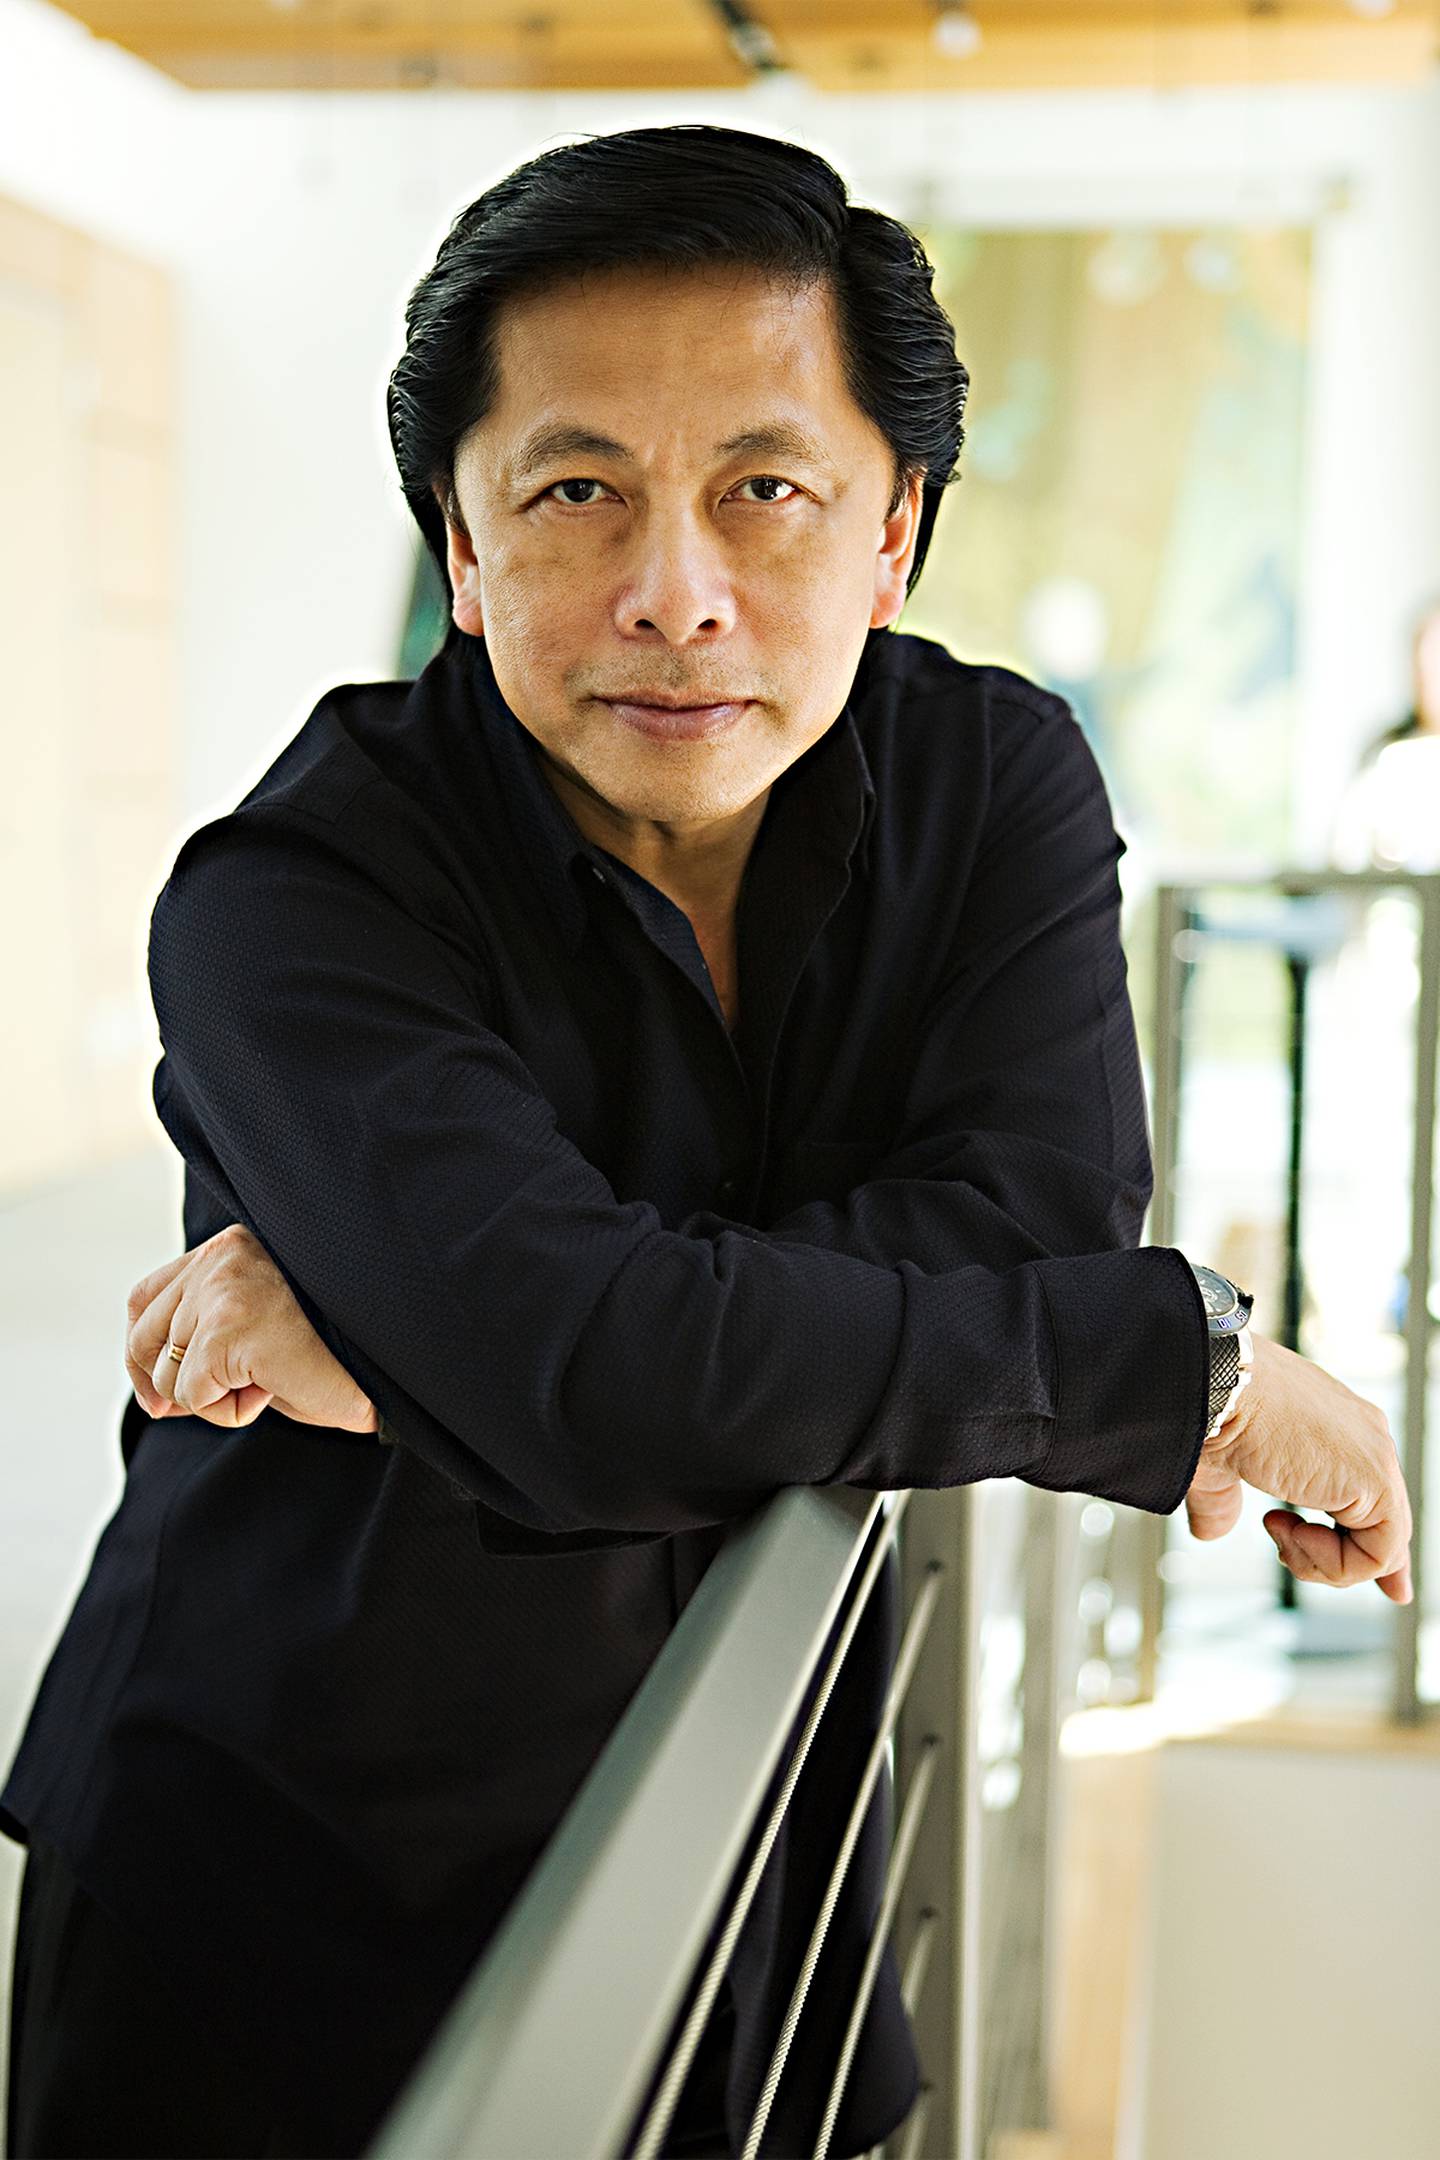 John C. Jay is the president of global creative for the retail holding company Fast Retailing